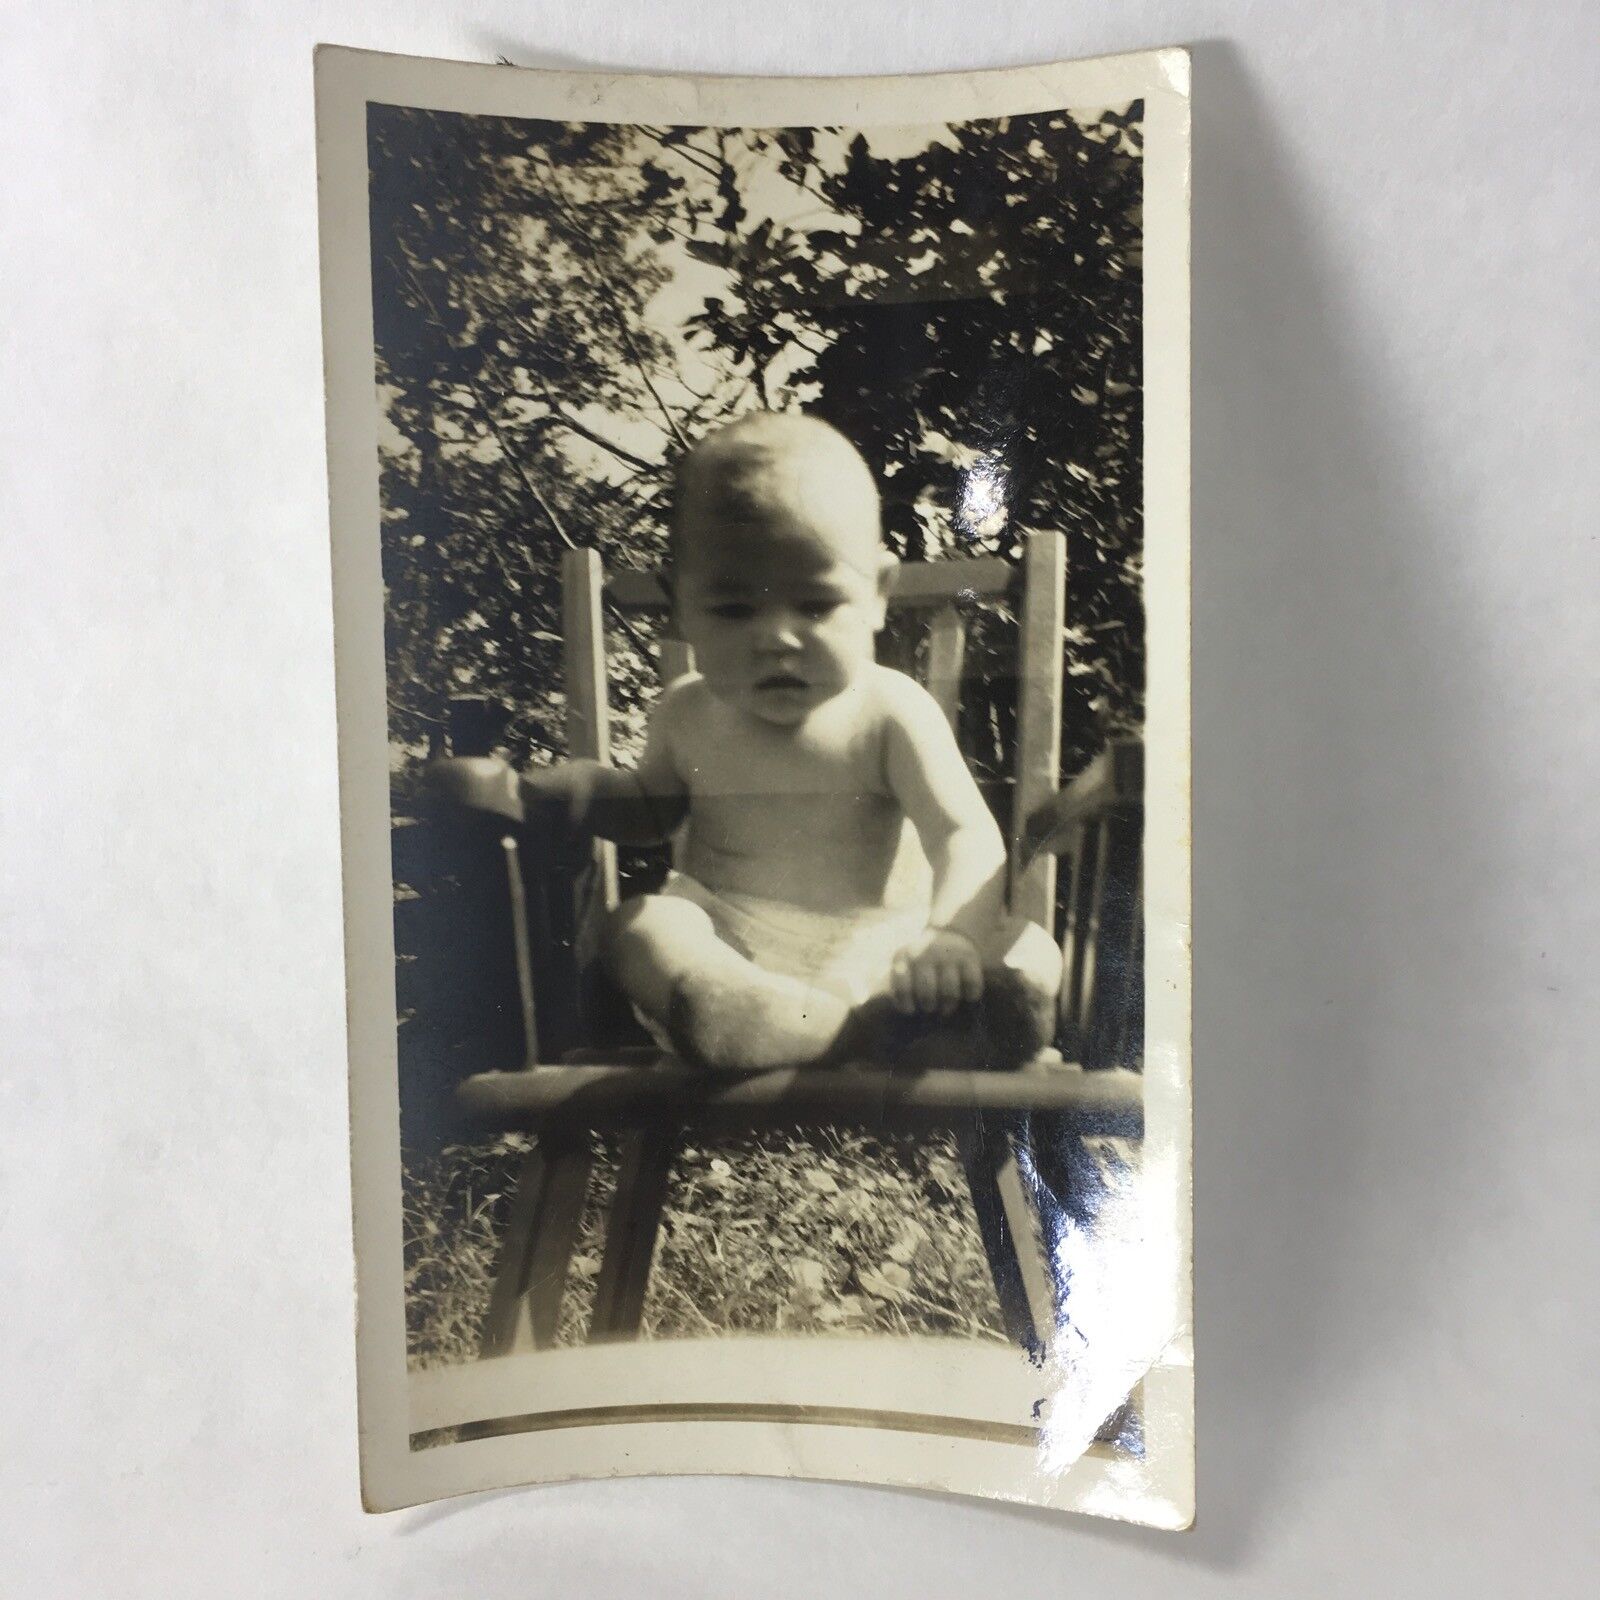 Vtg 1950s Young Baby Boy In Wooden Chair Outside B&W Portrait Photo Photograph